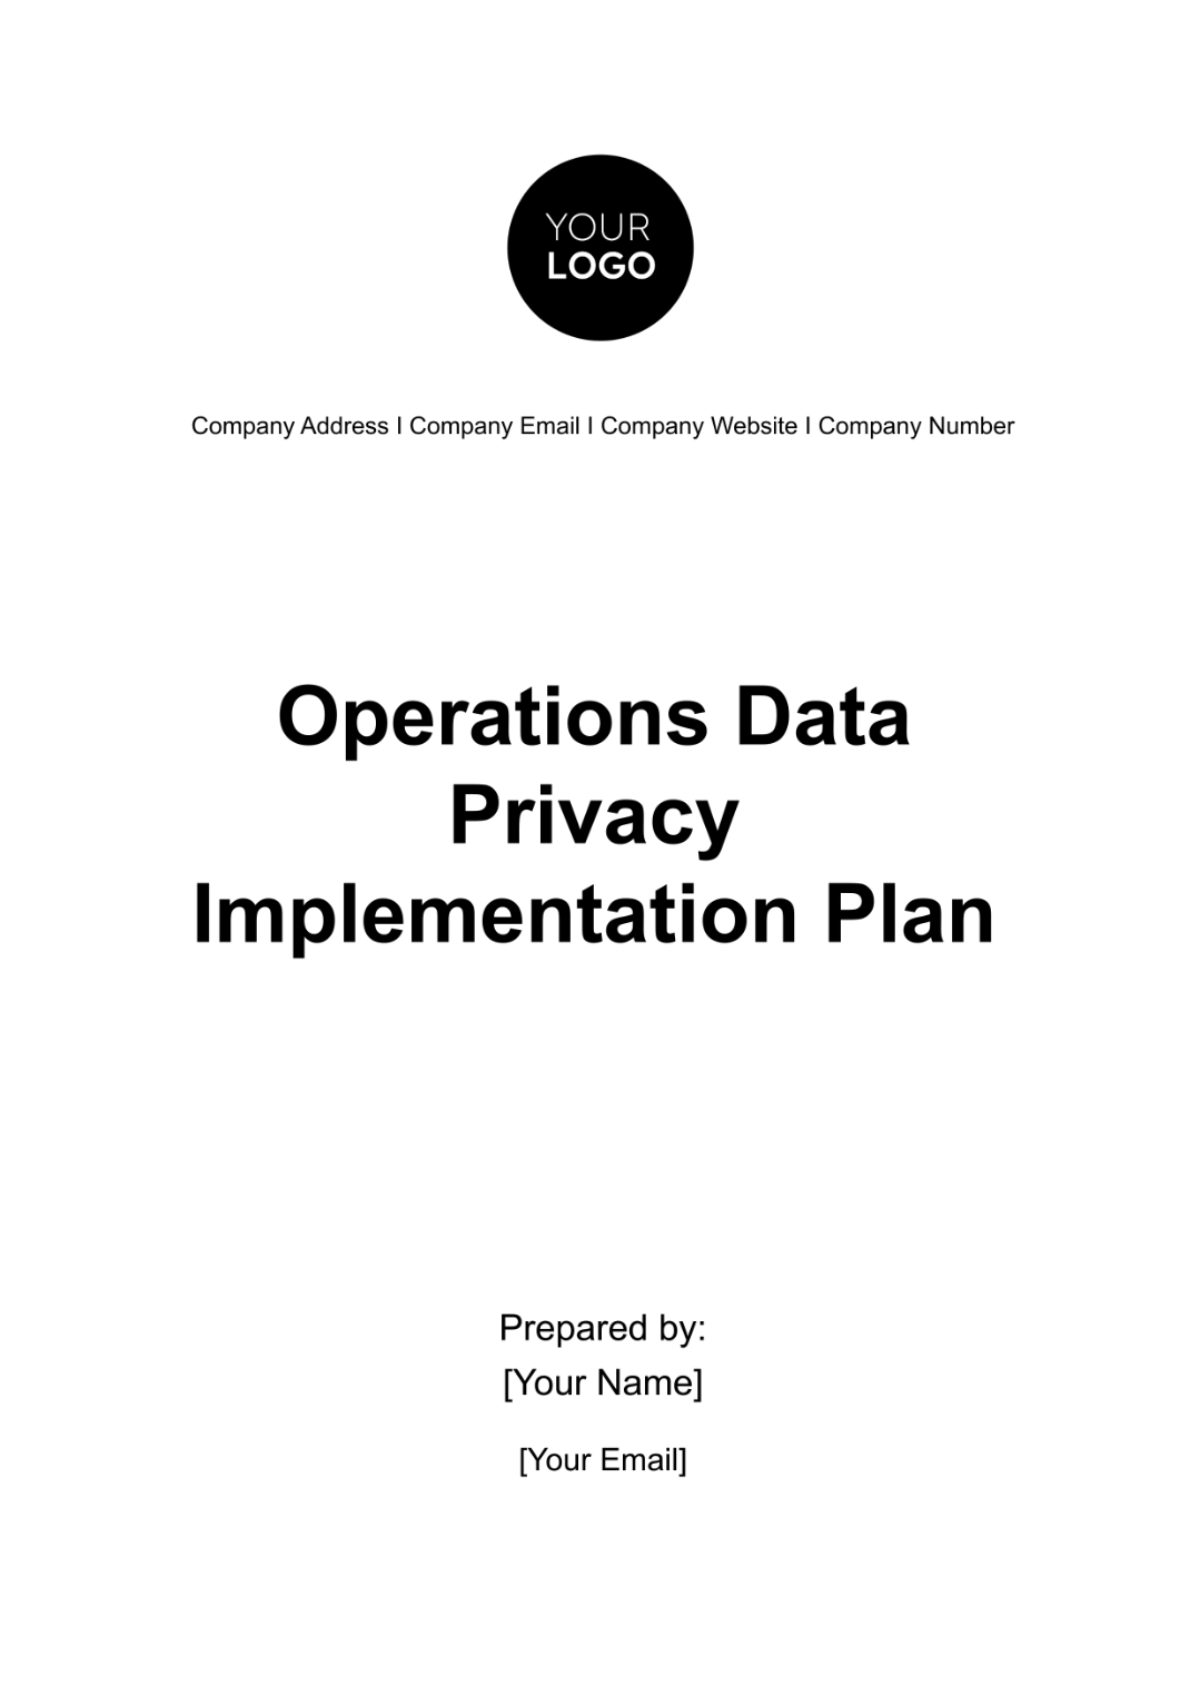 Operations Data Privacy Implementation Plan Template